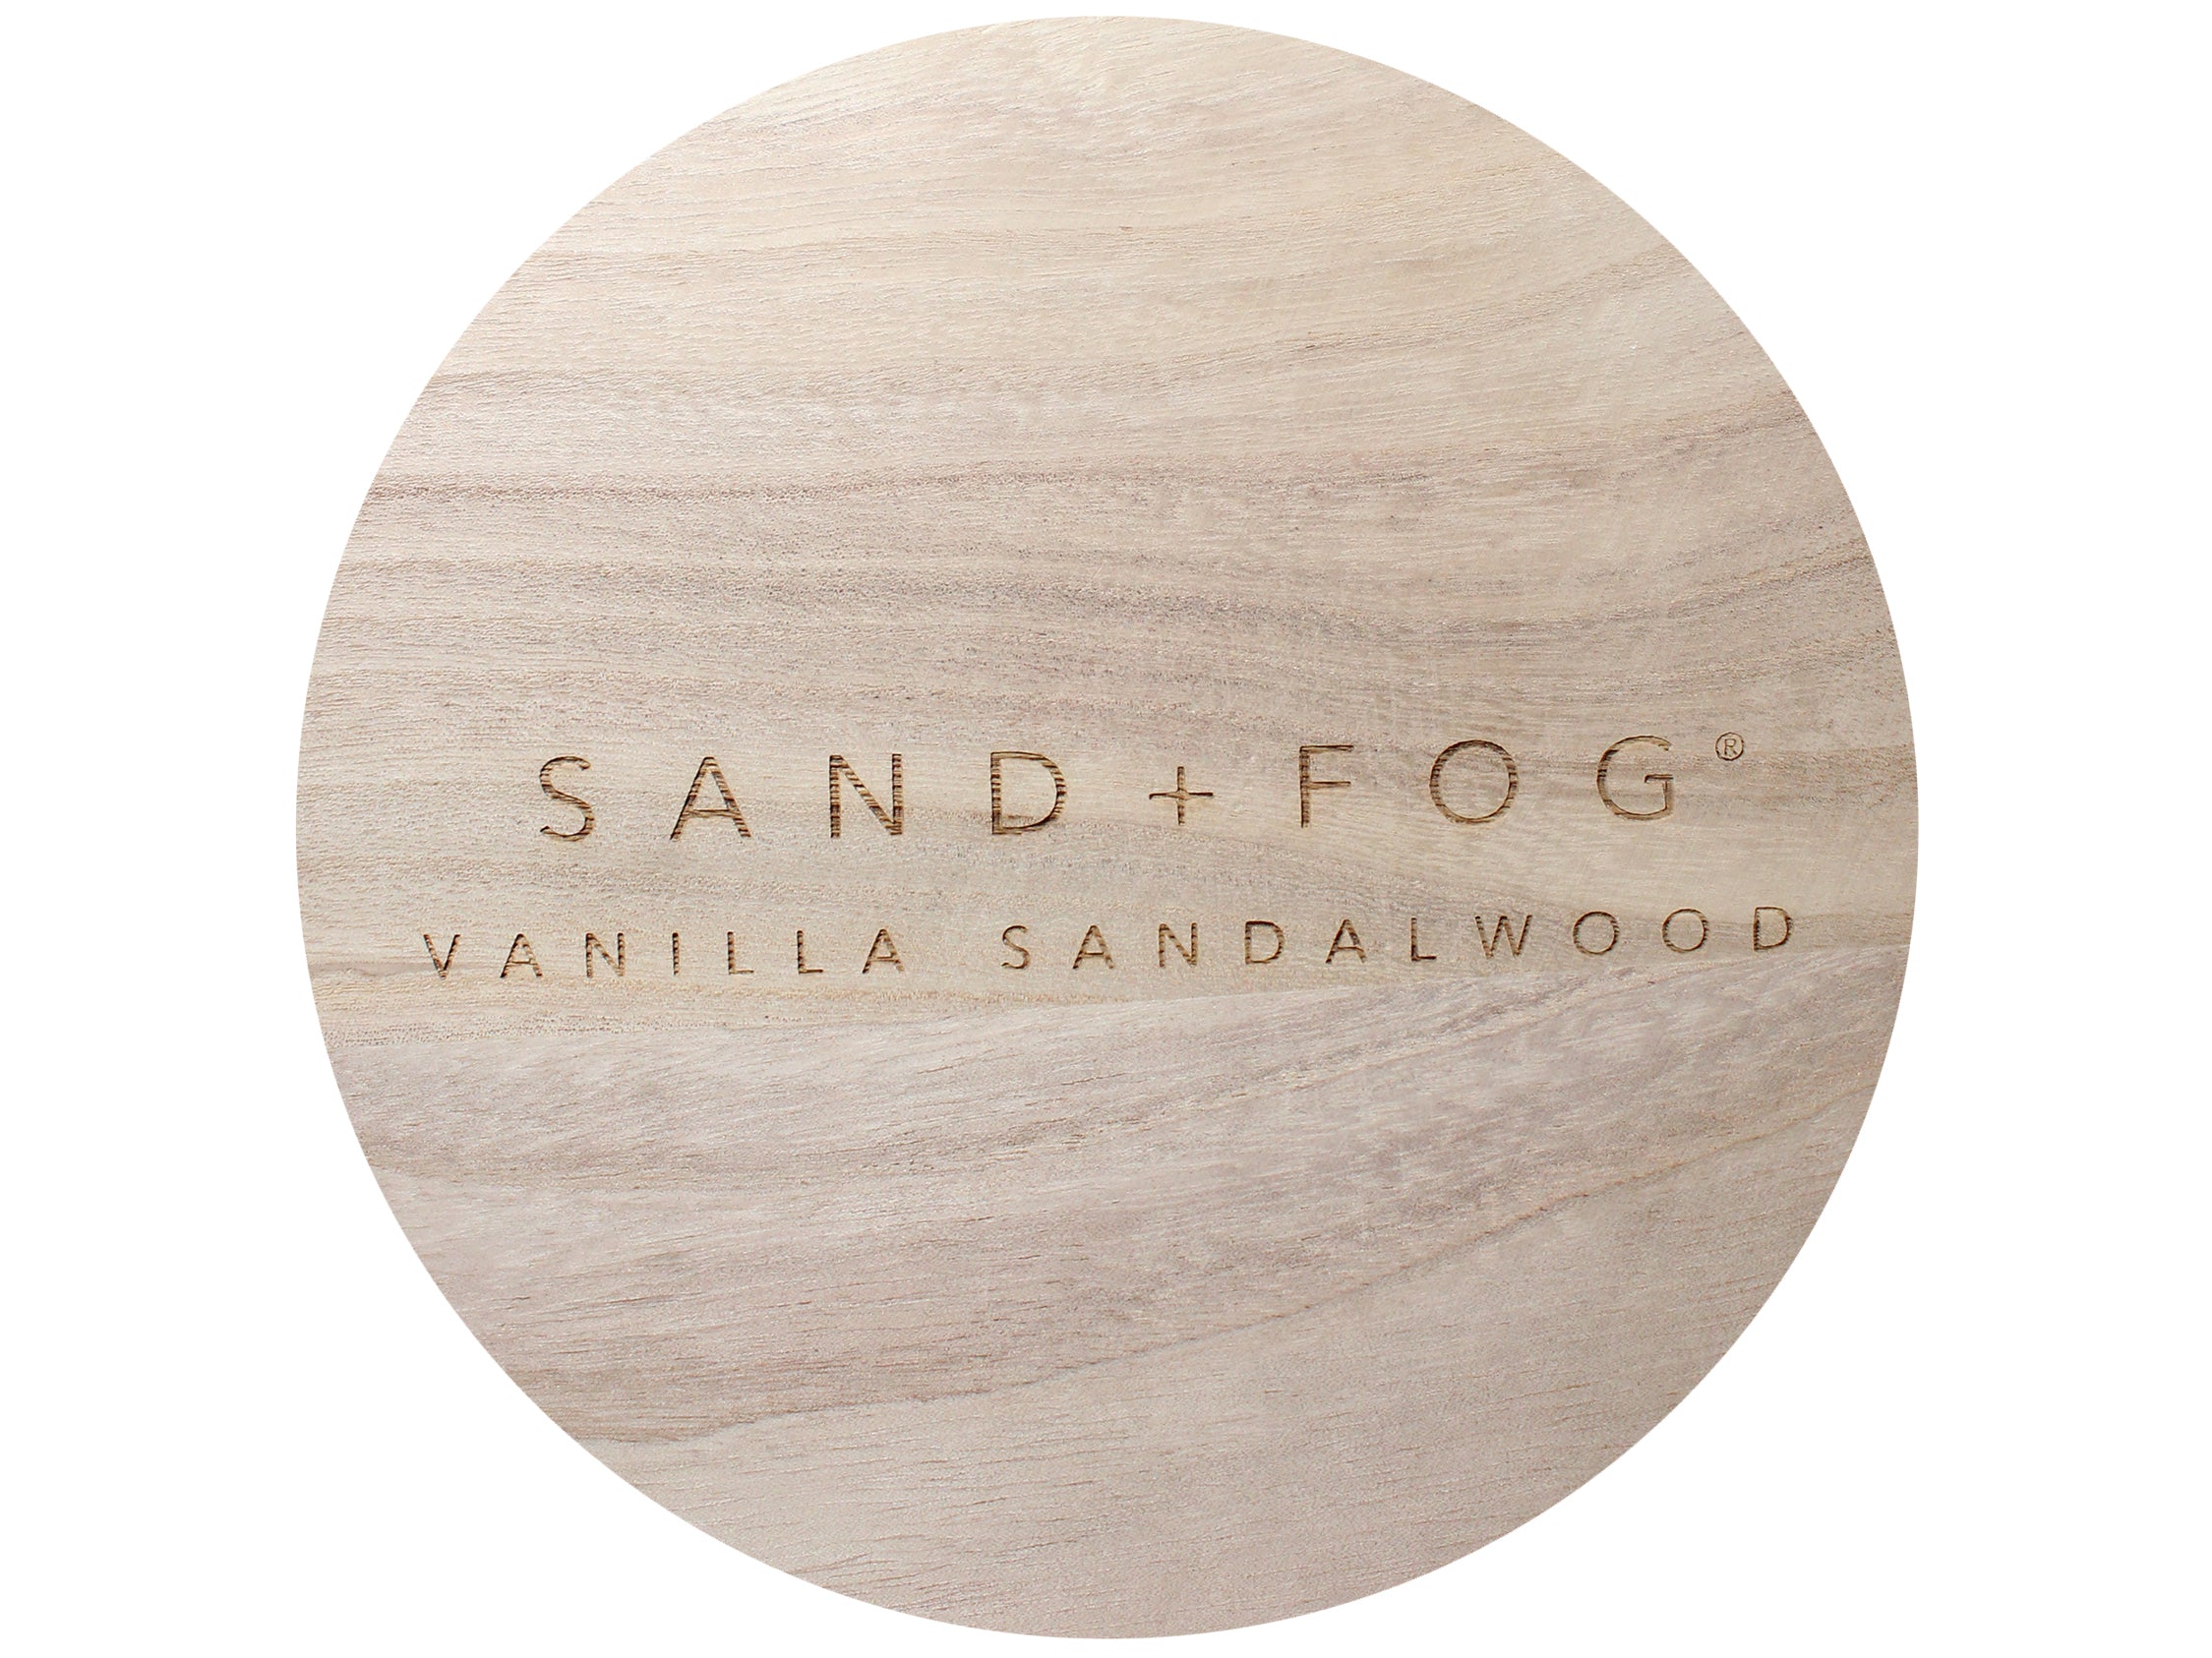 Vanilla Sandalwood 34 oz scented candle Cool gray vessel with S+F wood lid